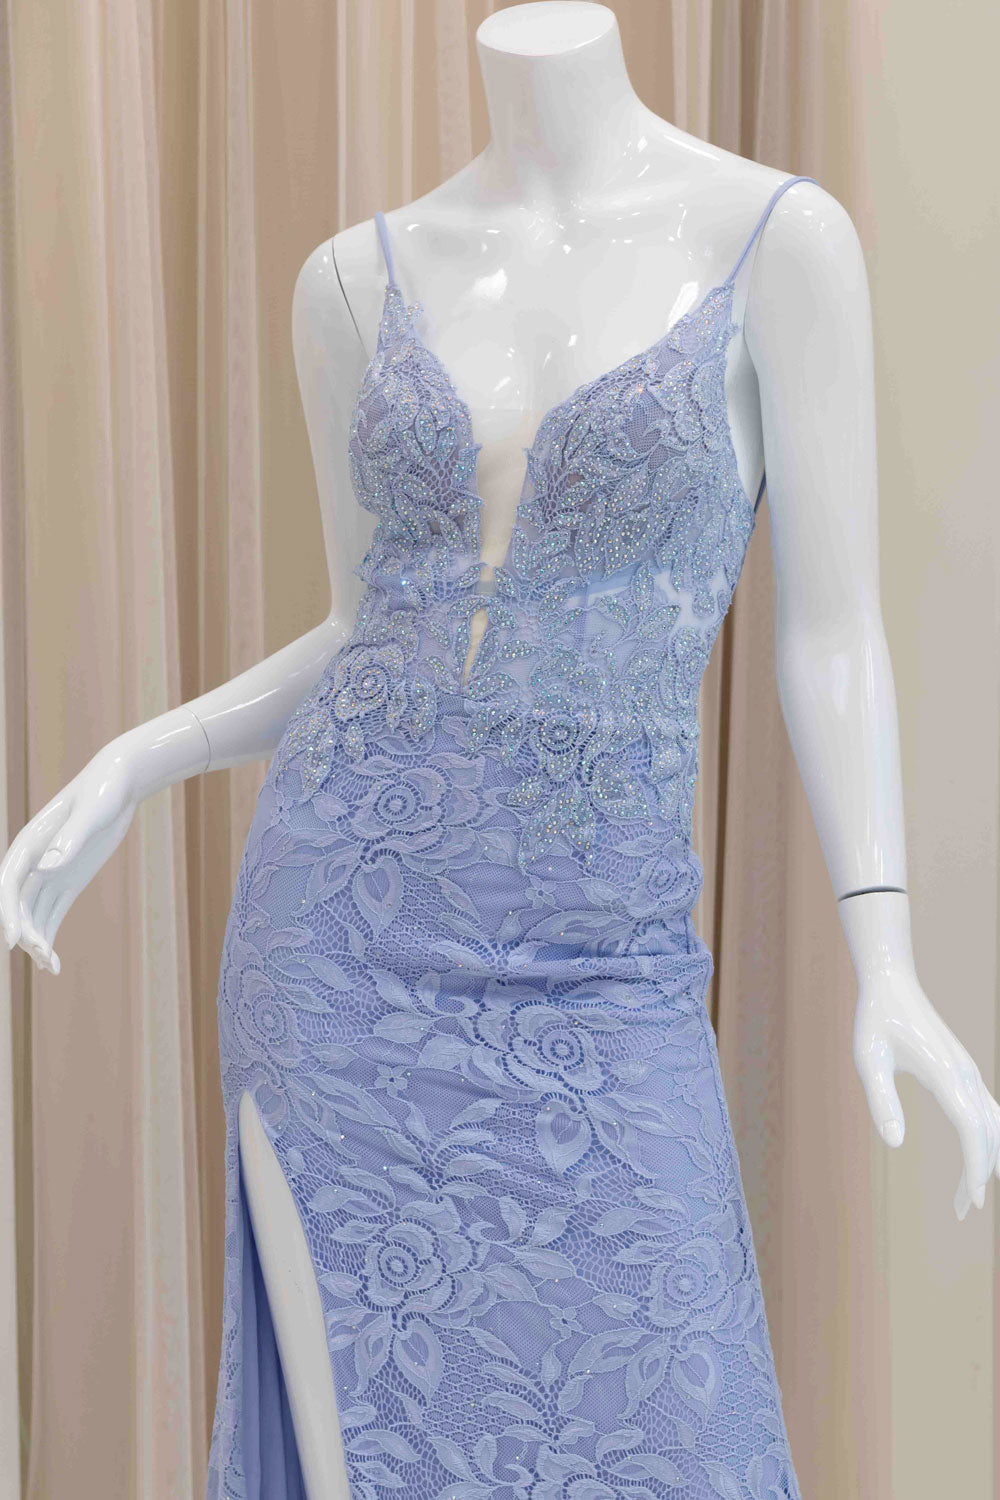 Chanell Lace Evening Dress in Lavender